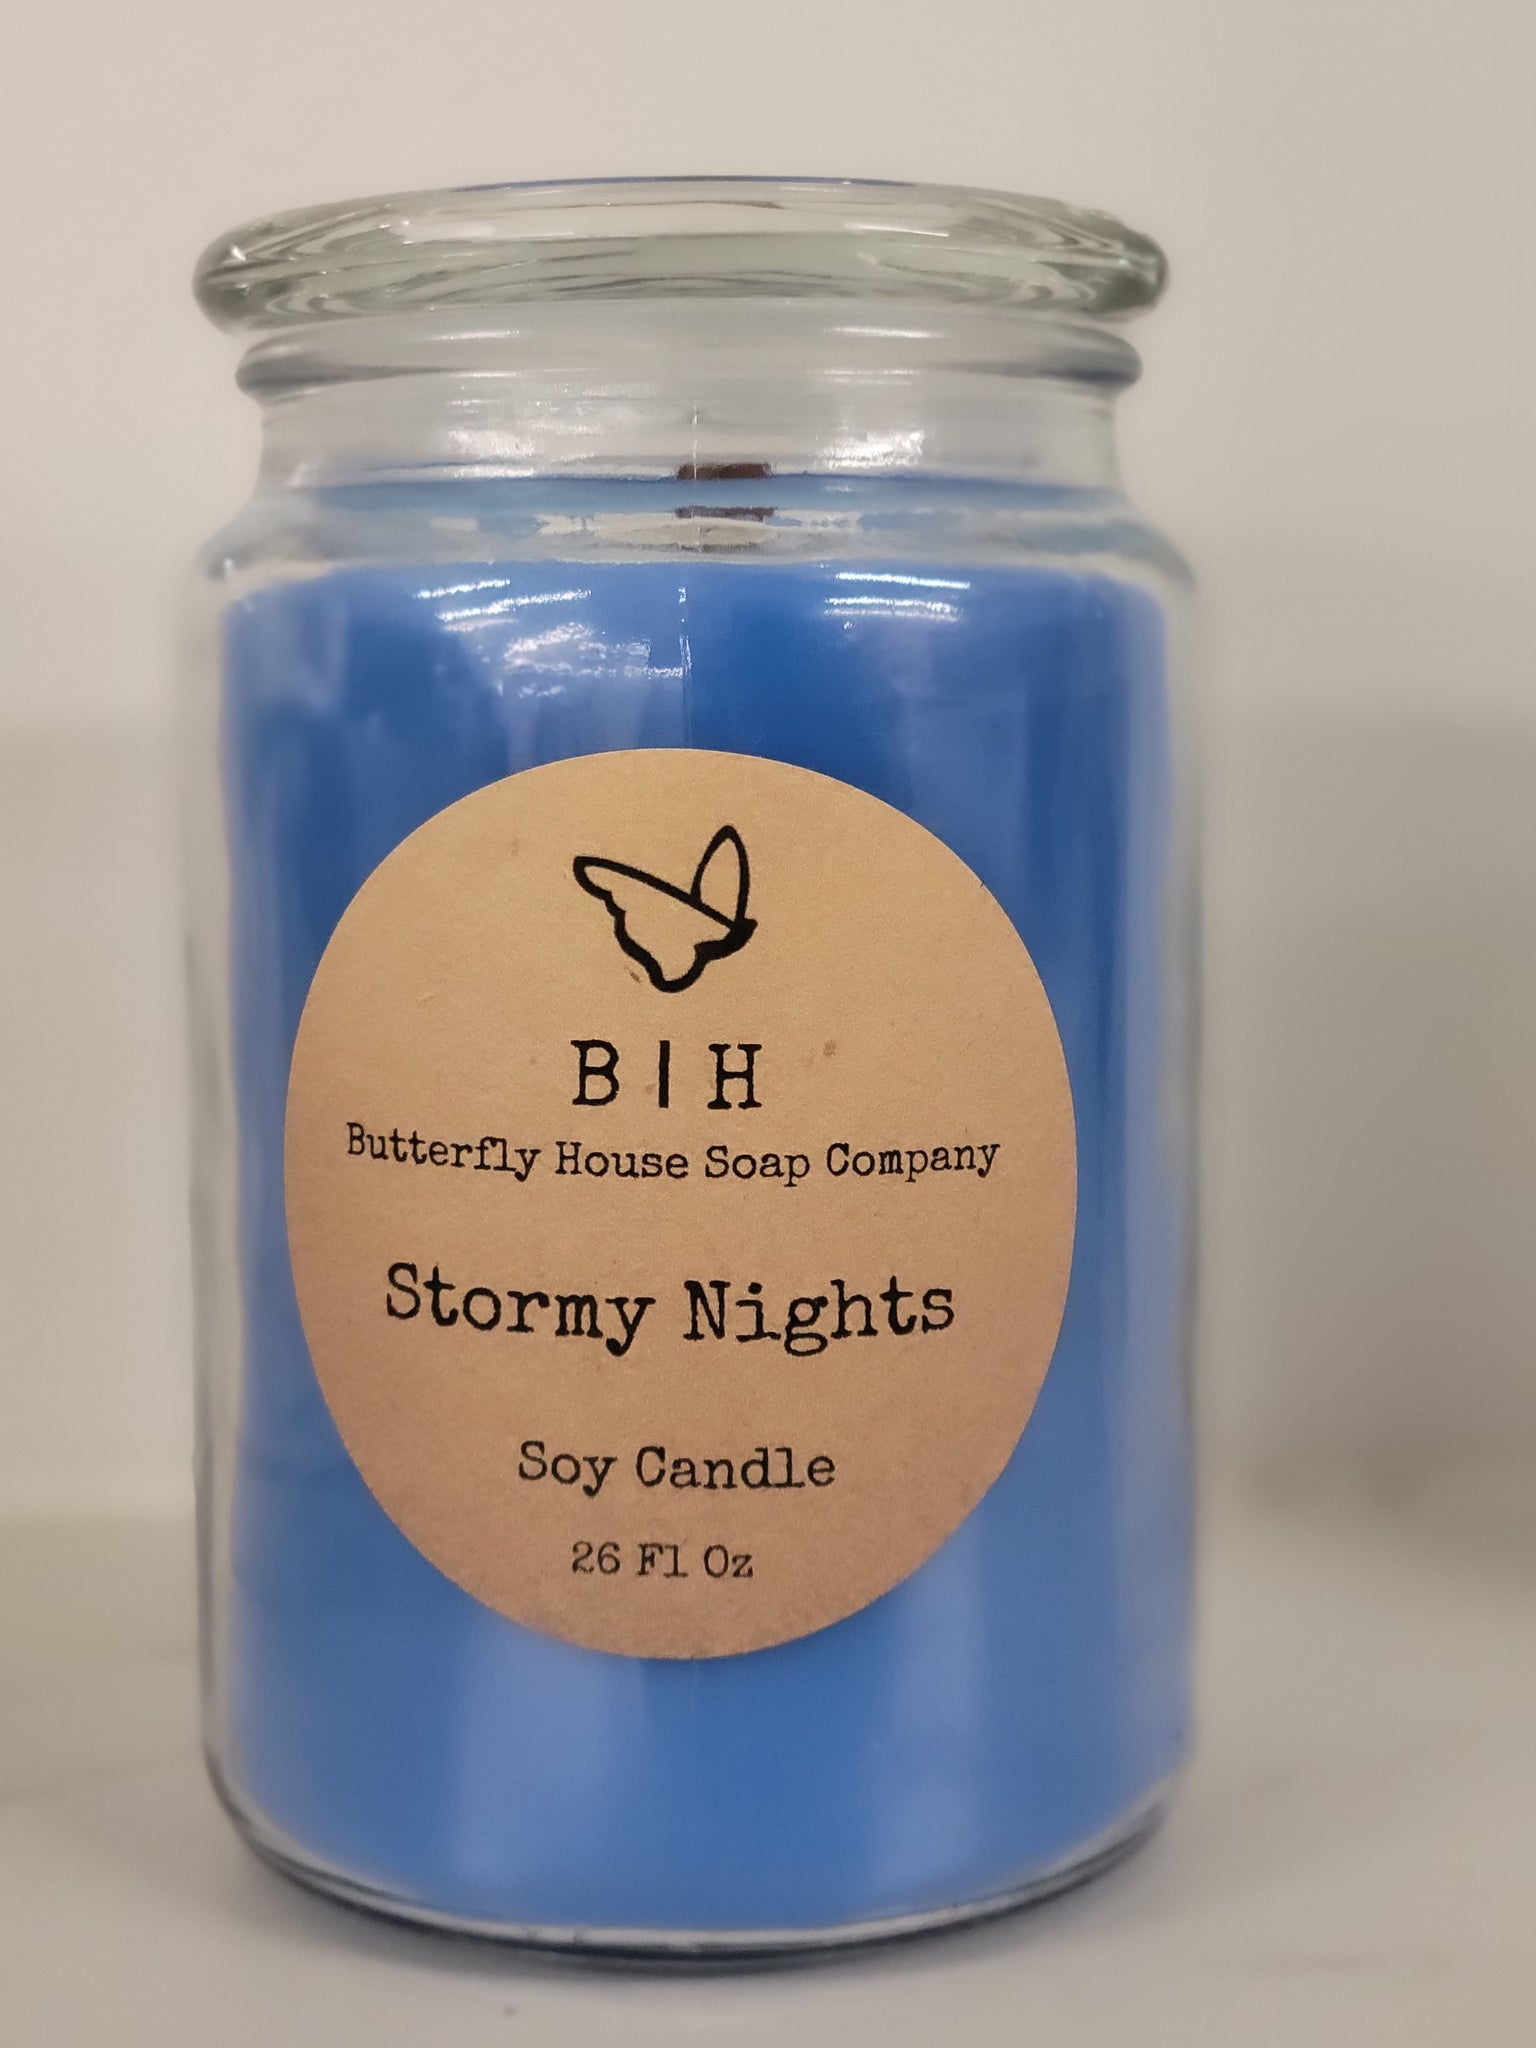 26 fl oz Soy Candle Jars – Butterfly House Soap Company